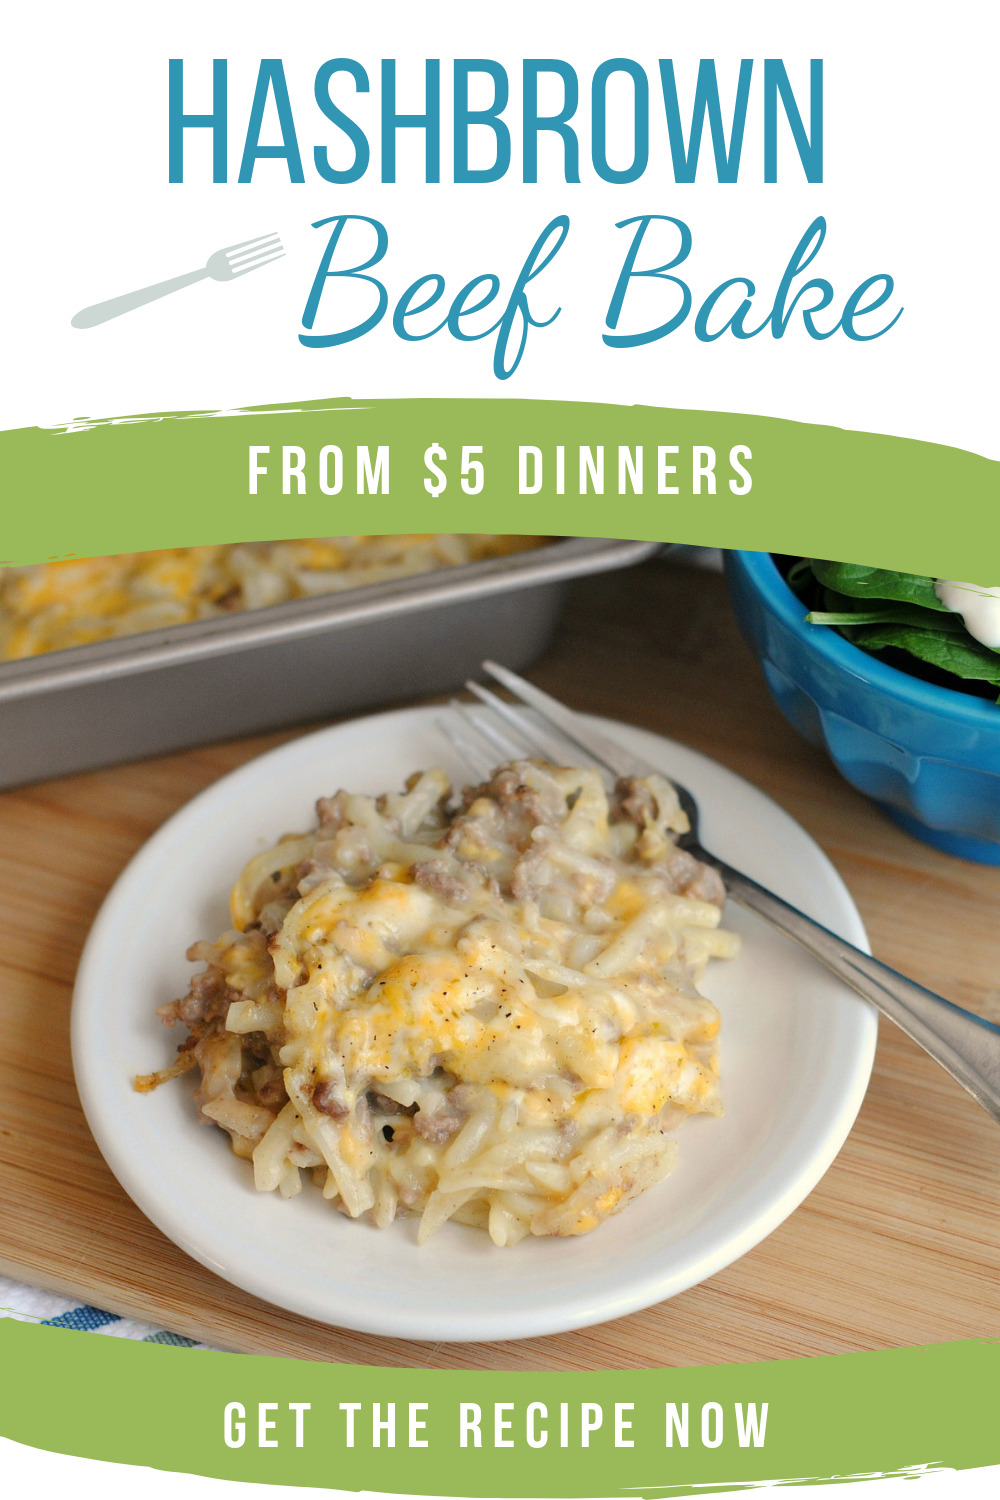 Delicious Make-Ahead Recipe for Hashbrown Beef Bake